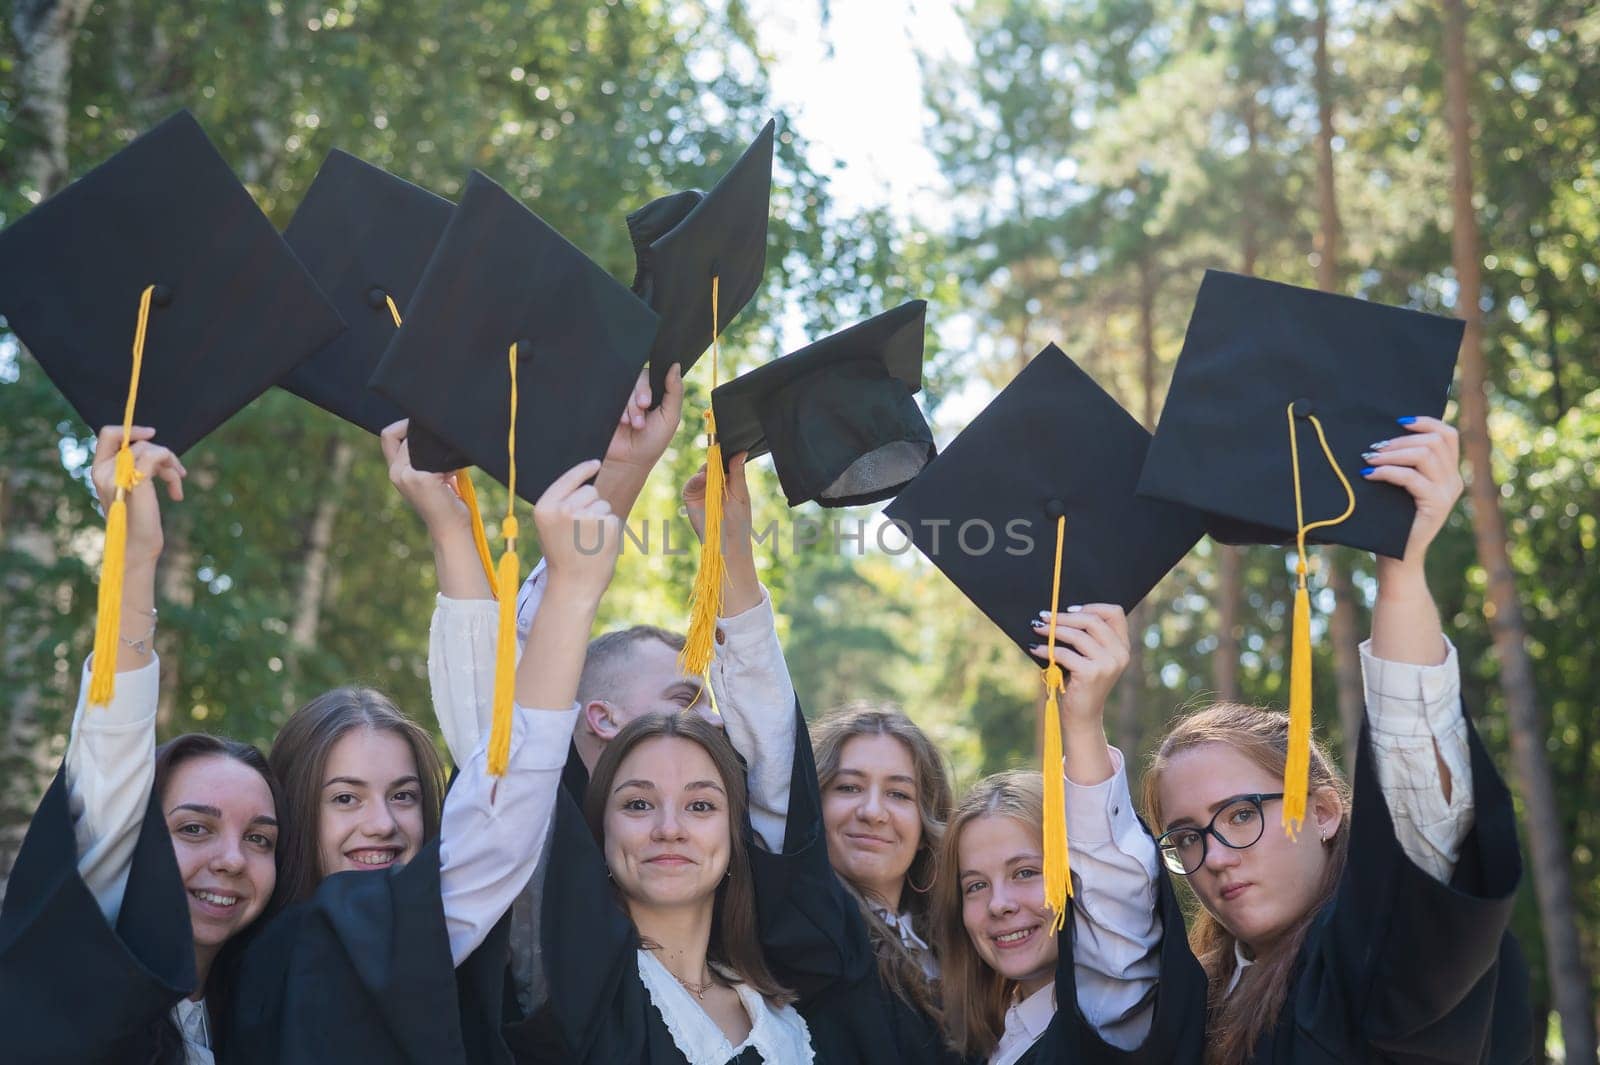 Classmates in graduation gowns throwing hats outdoors